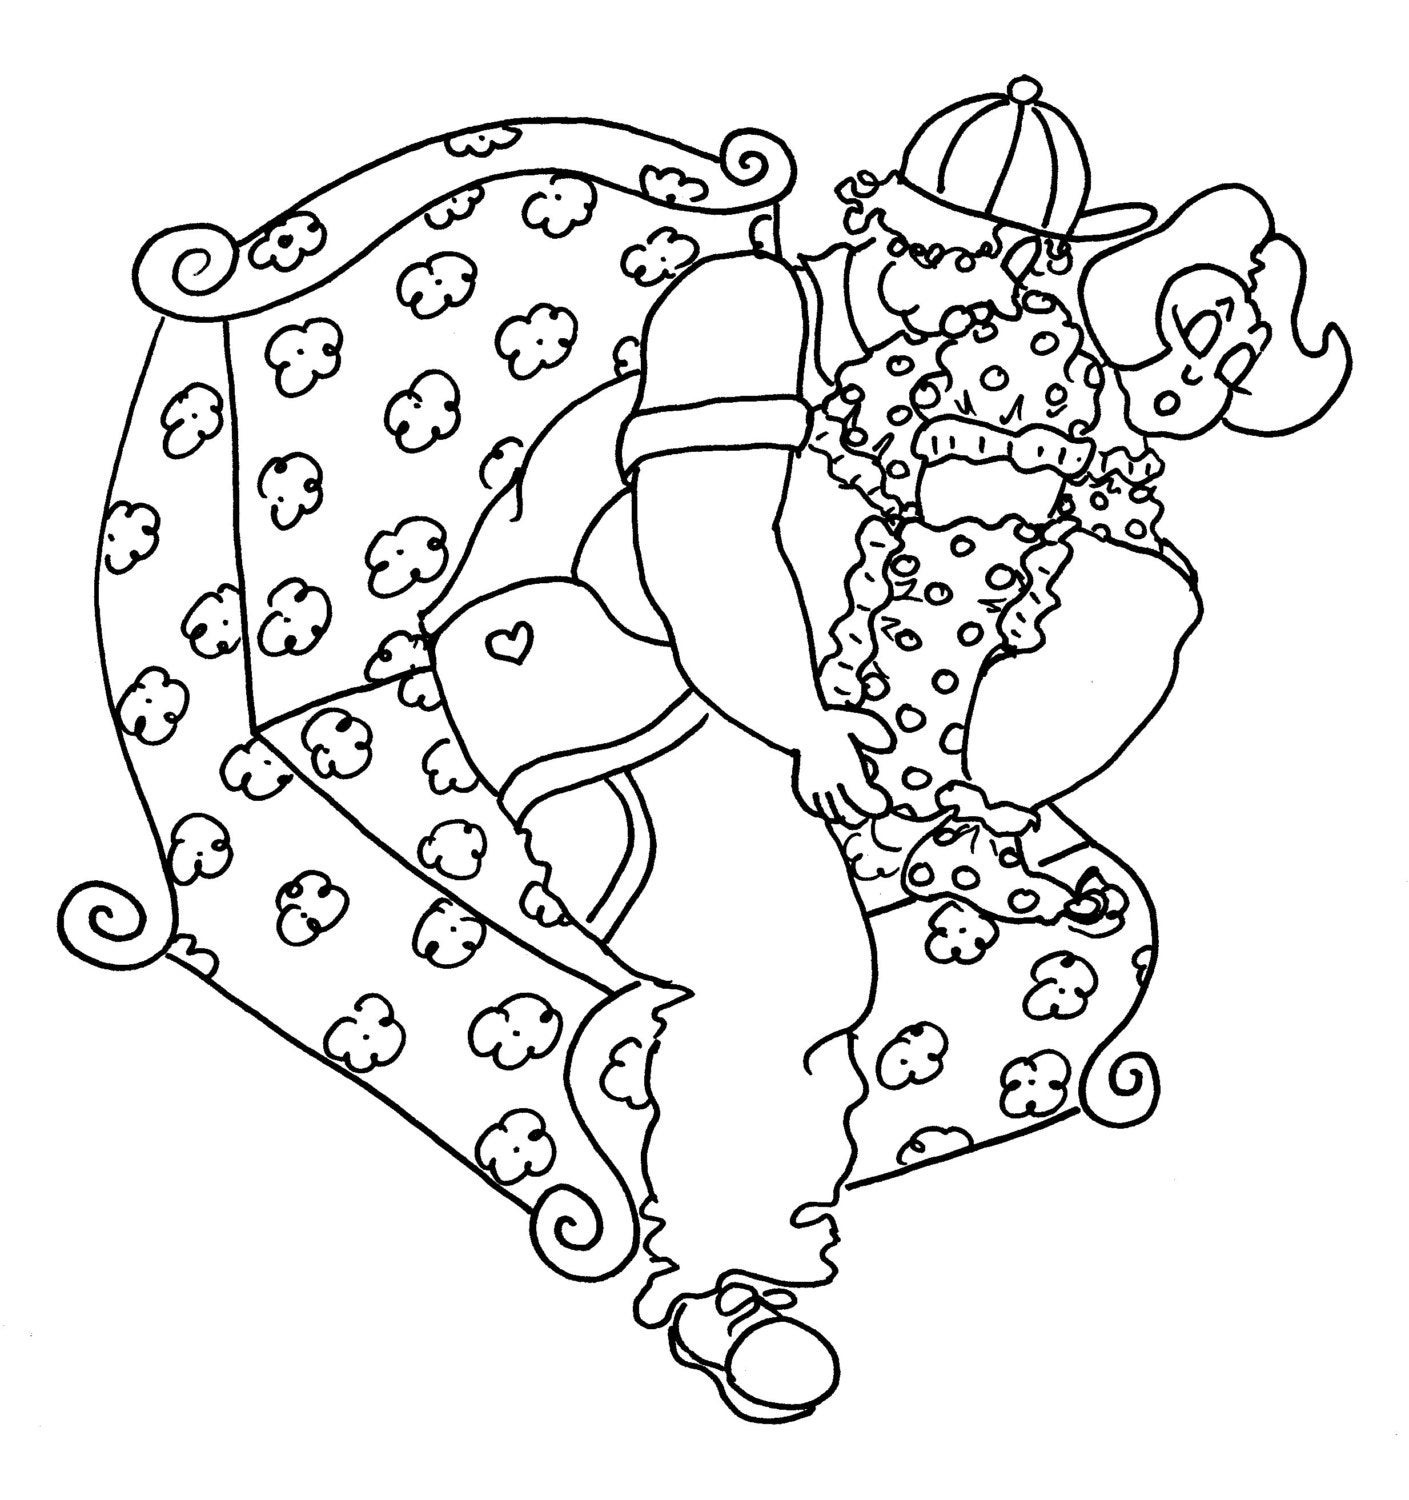 Funny Adult Coloring Pages
 The Frog Funny y Coloring Pages for Adults from the